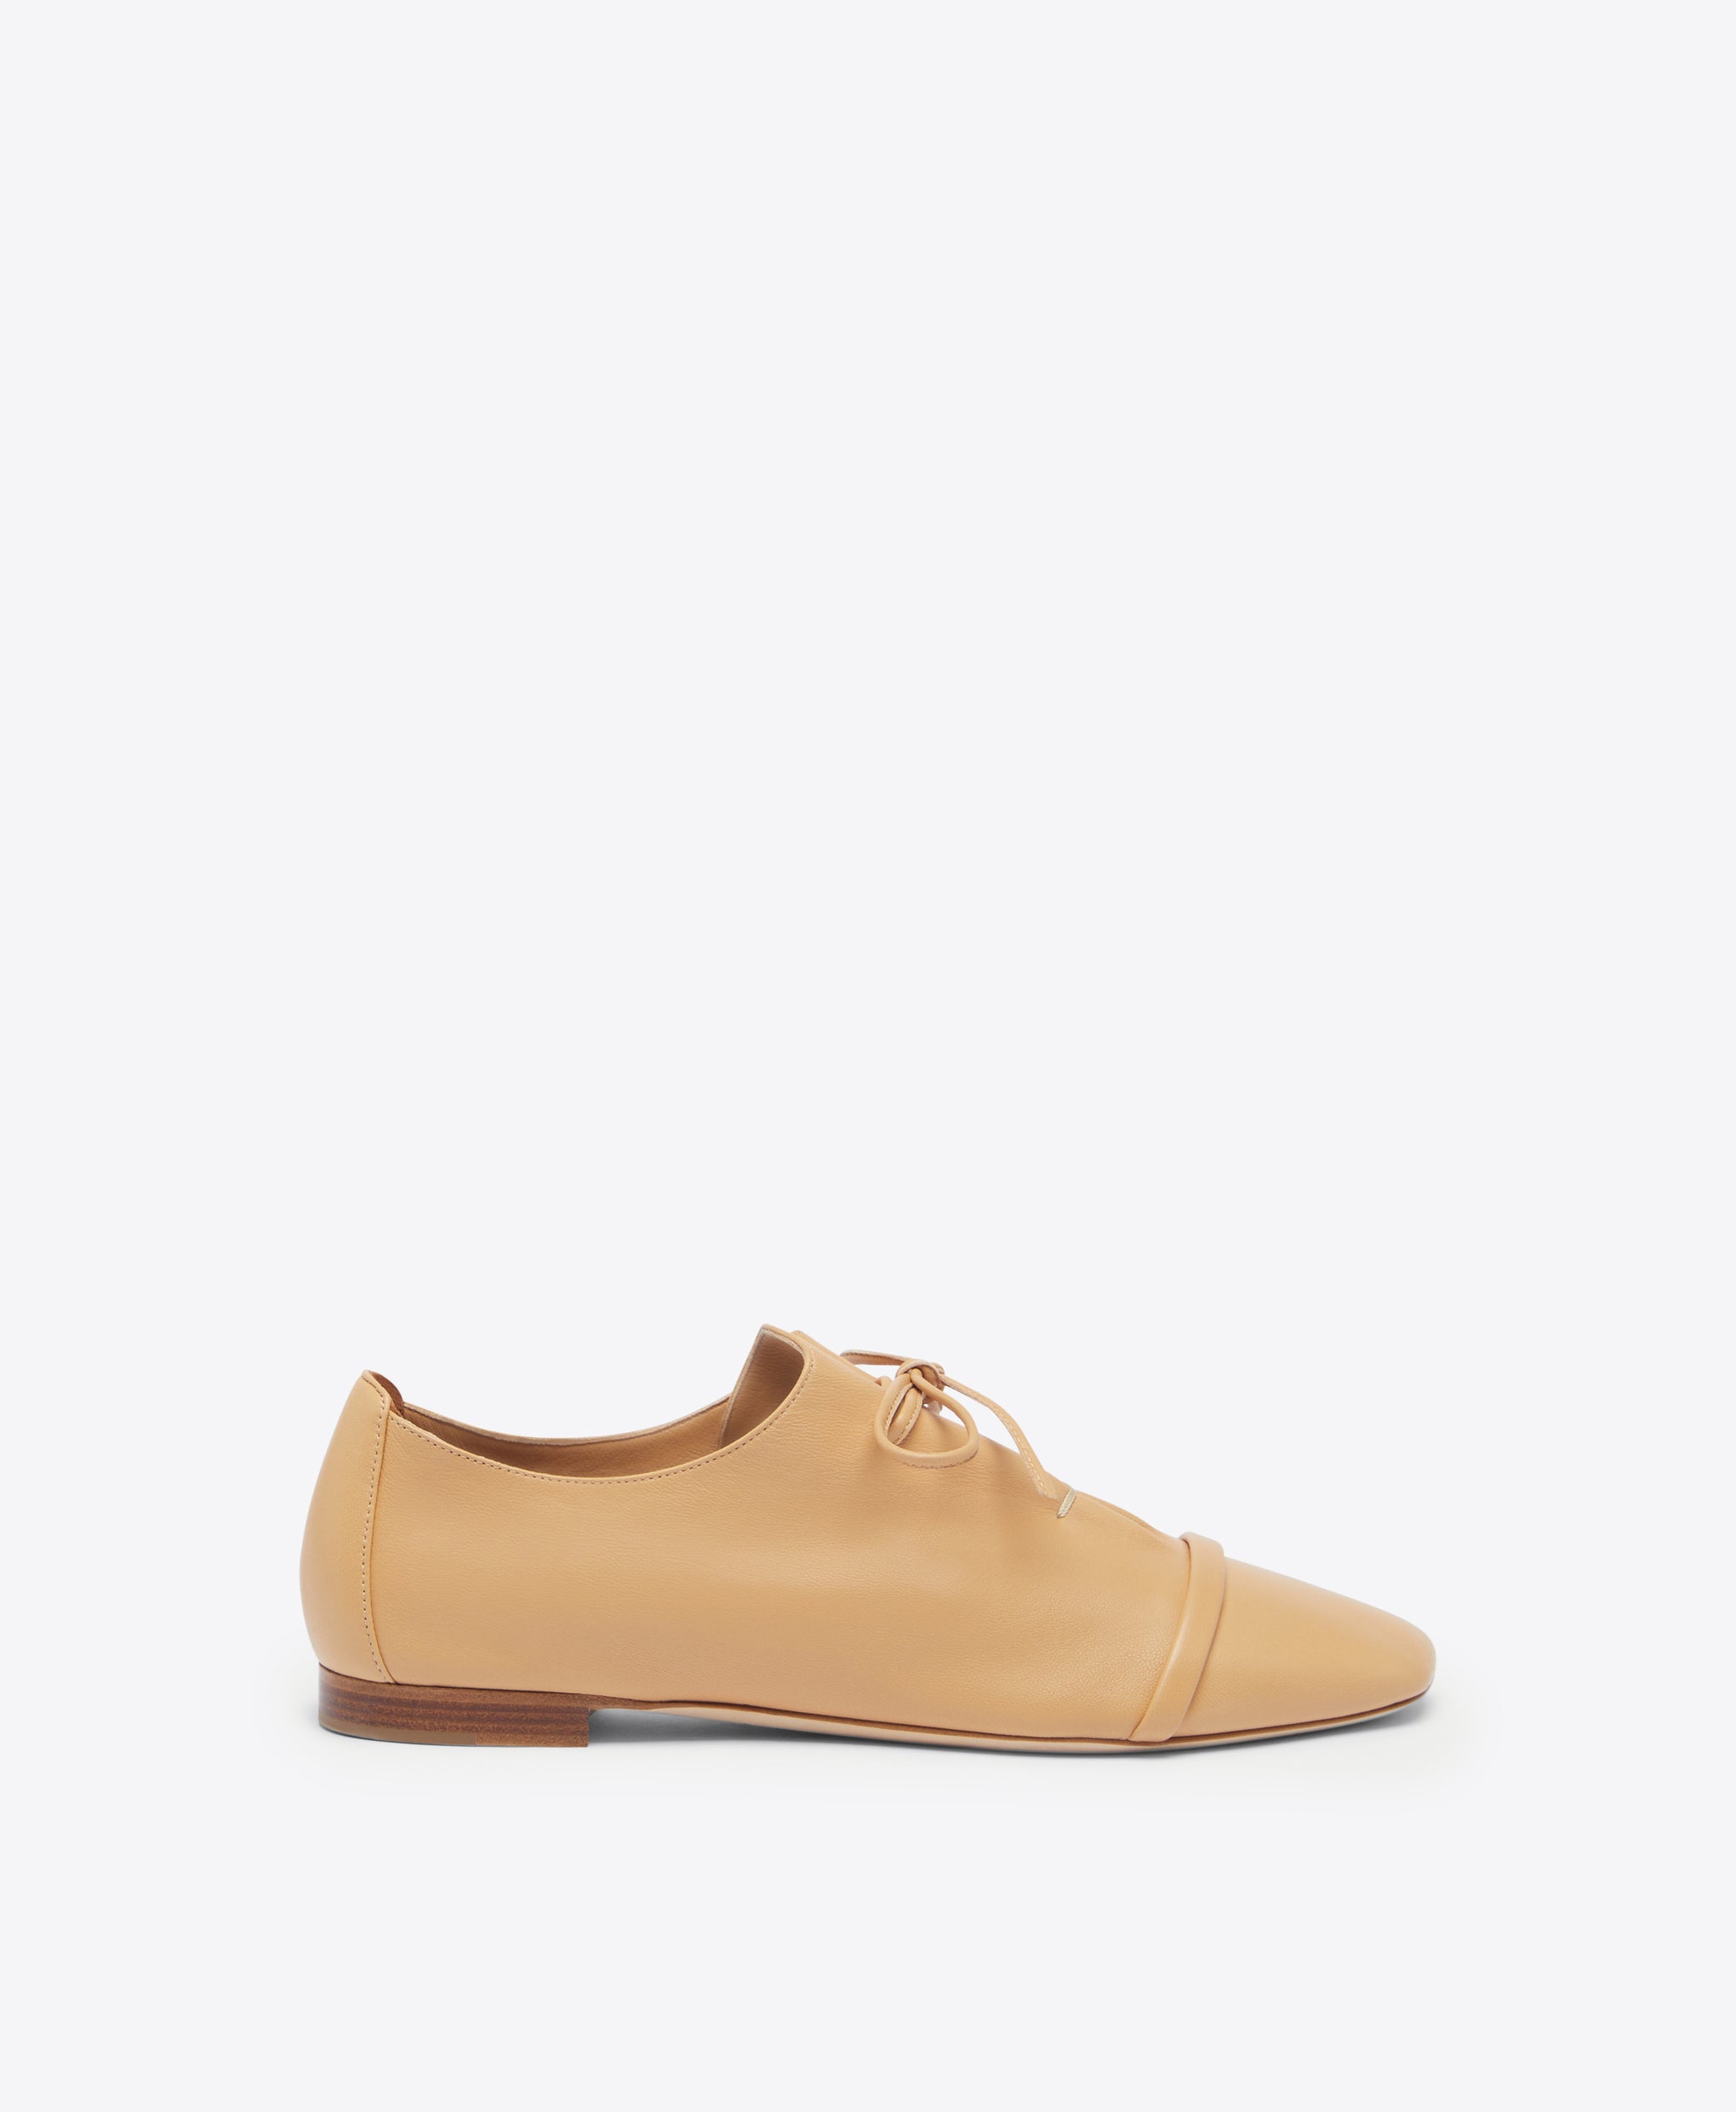 Malone Souliers Jean Sepia Leather Flat Loafers